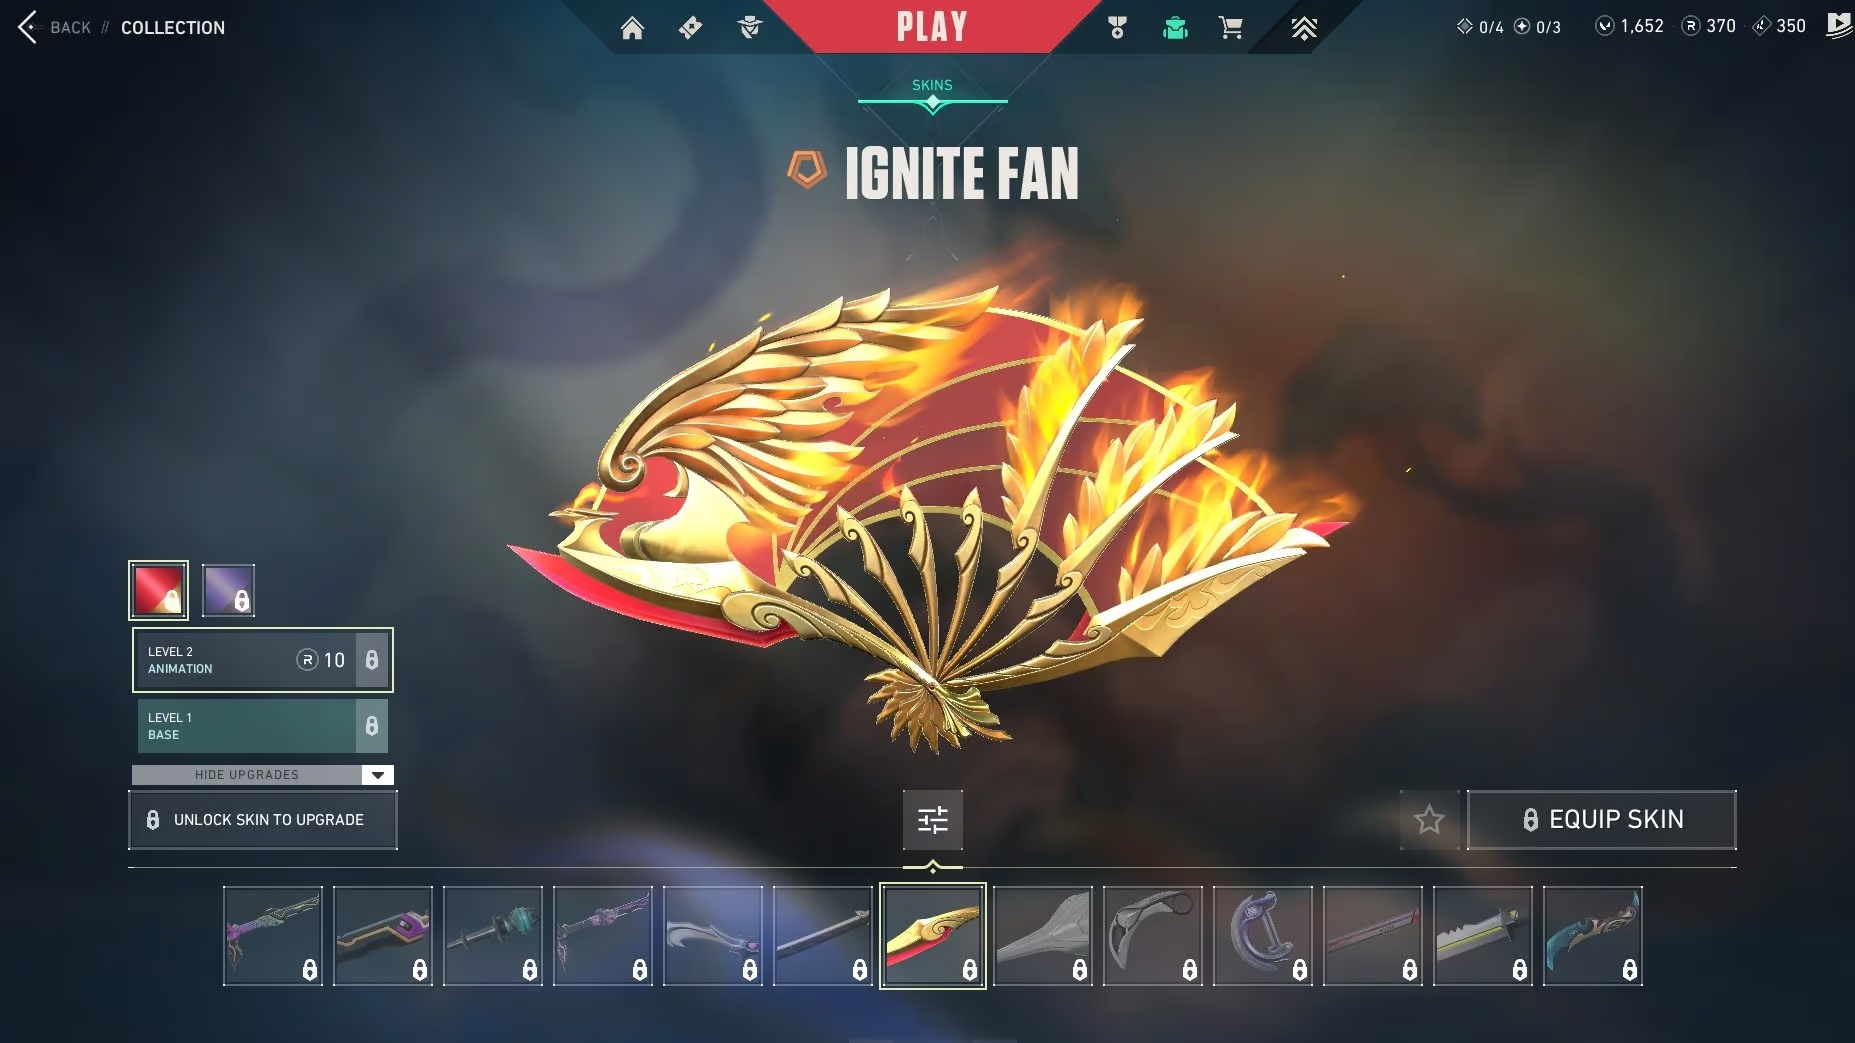 #Valorant IGNITE Melee: Can you get it for free?